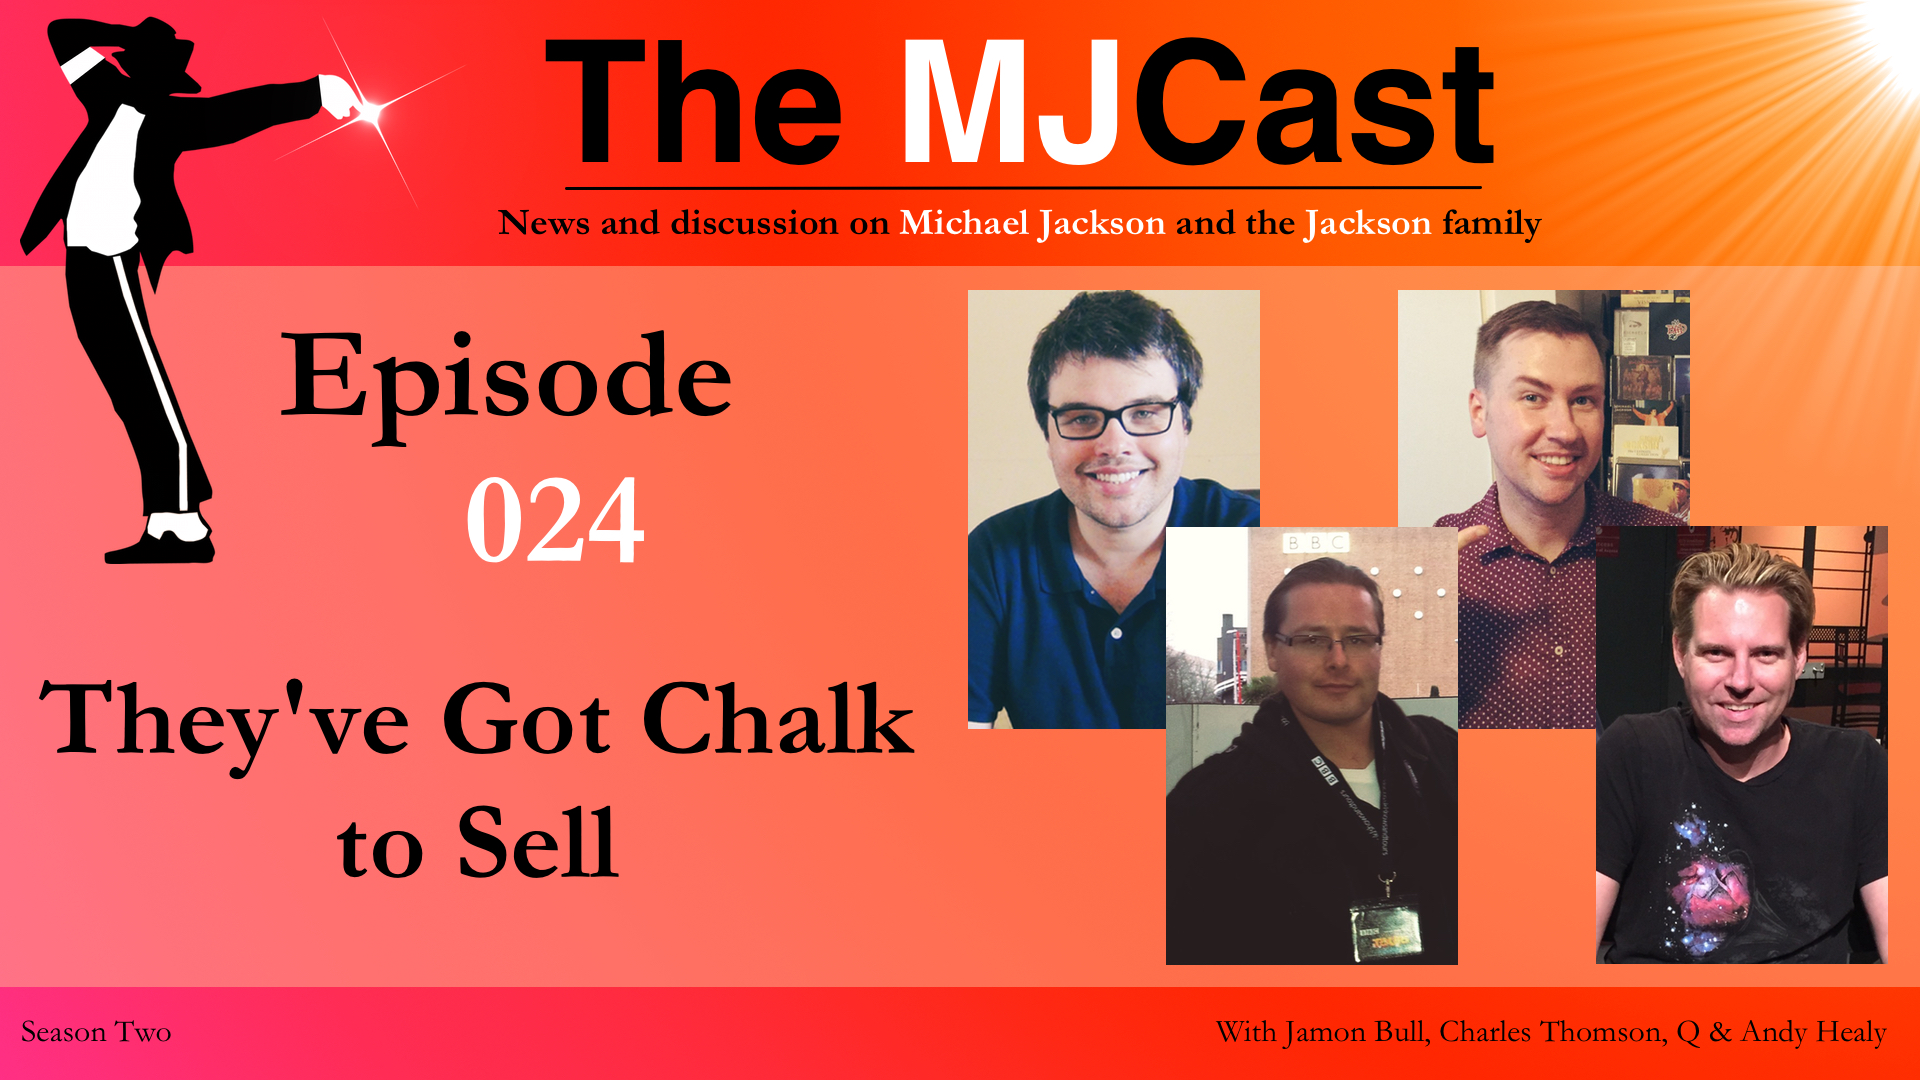 Episode 024 - They've Got Chalk to Sell YouTube Art